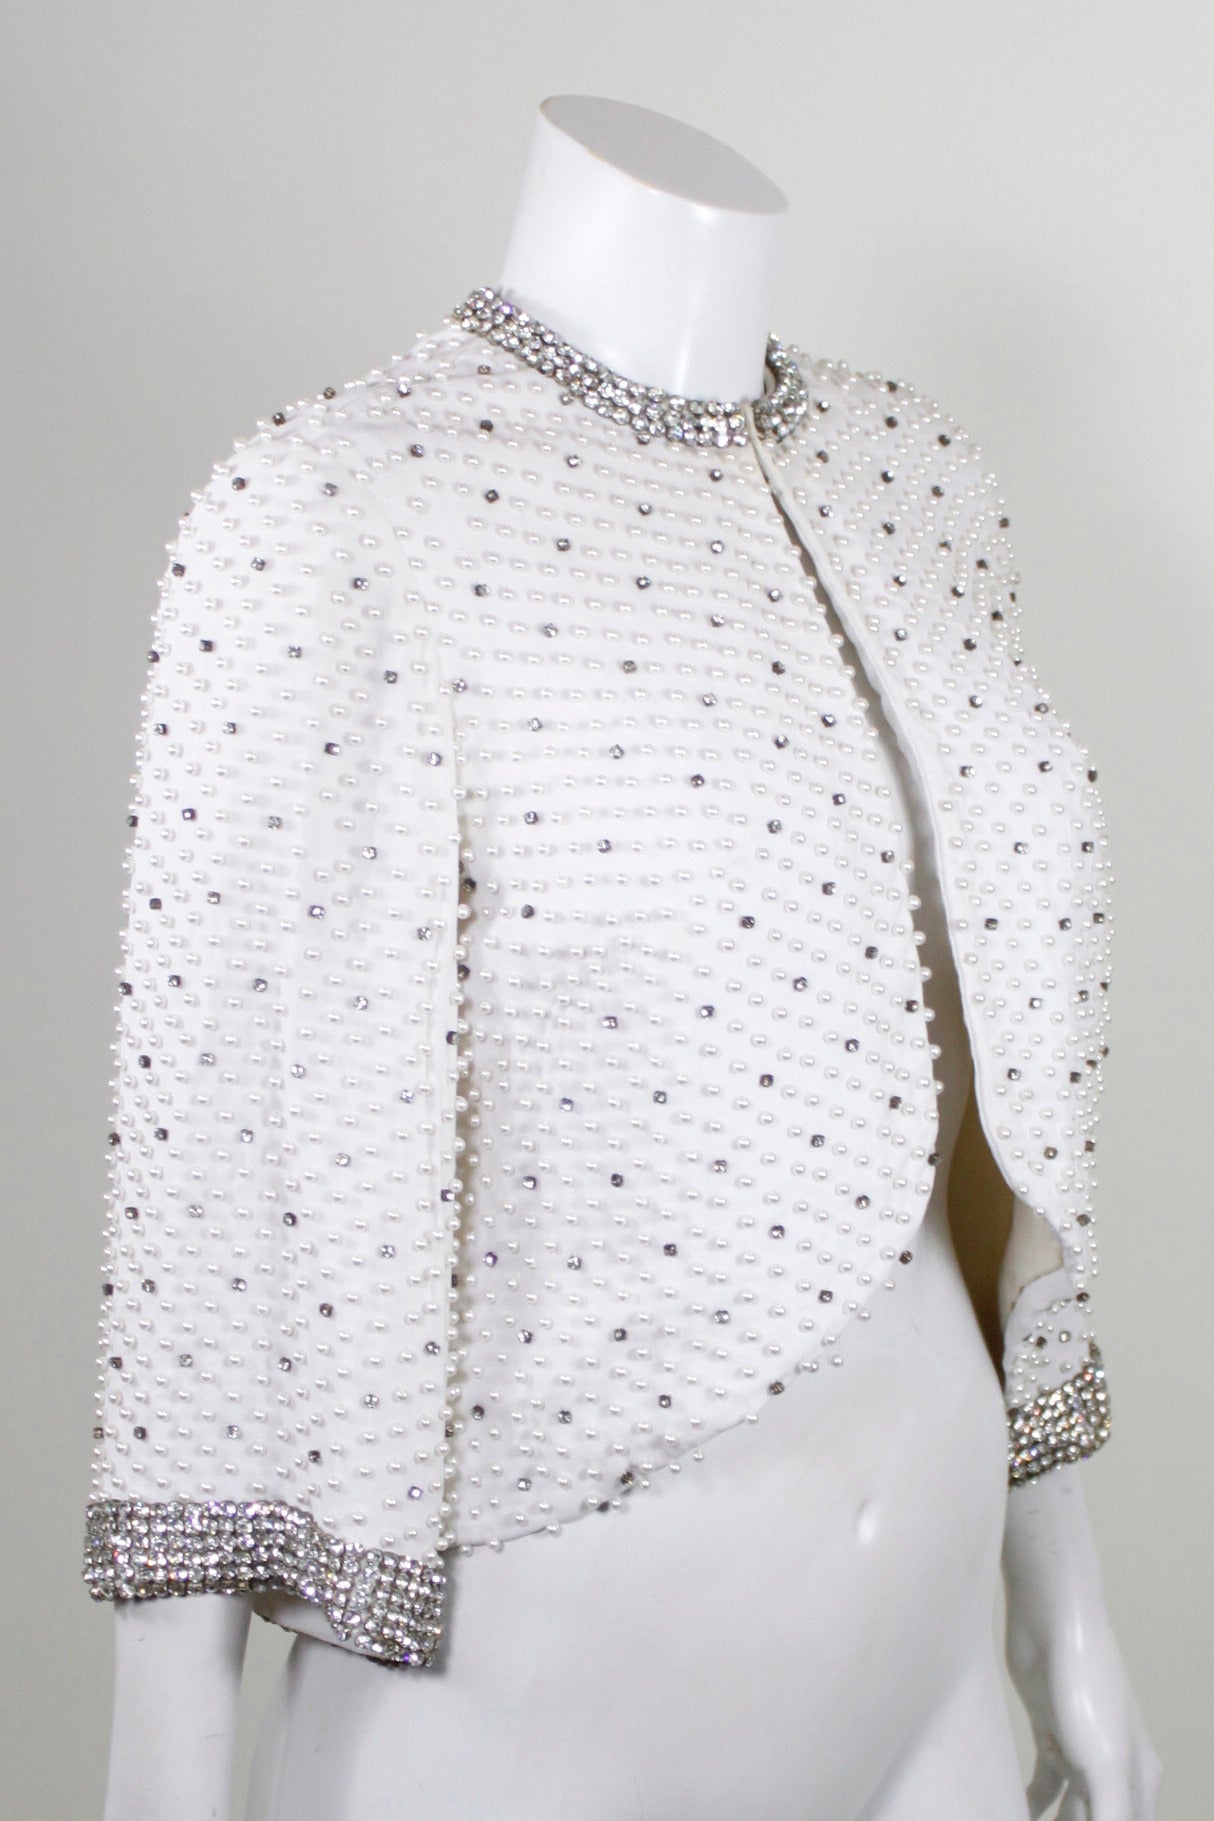 A gorgeous evening jacket from the 1960s. Beautiful cream rayon crepe is embellished with pearls and beads throughout. The collar and cuffs feature dazzling rhinestone trim. The silhouette is a-line with bell sleeves. 

Measurements--
Bust: up to